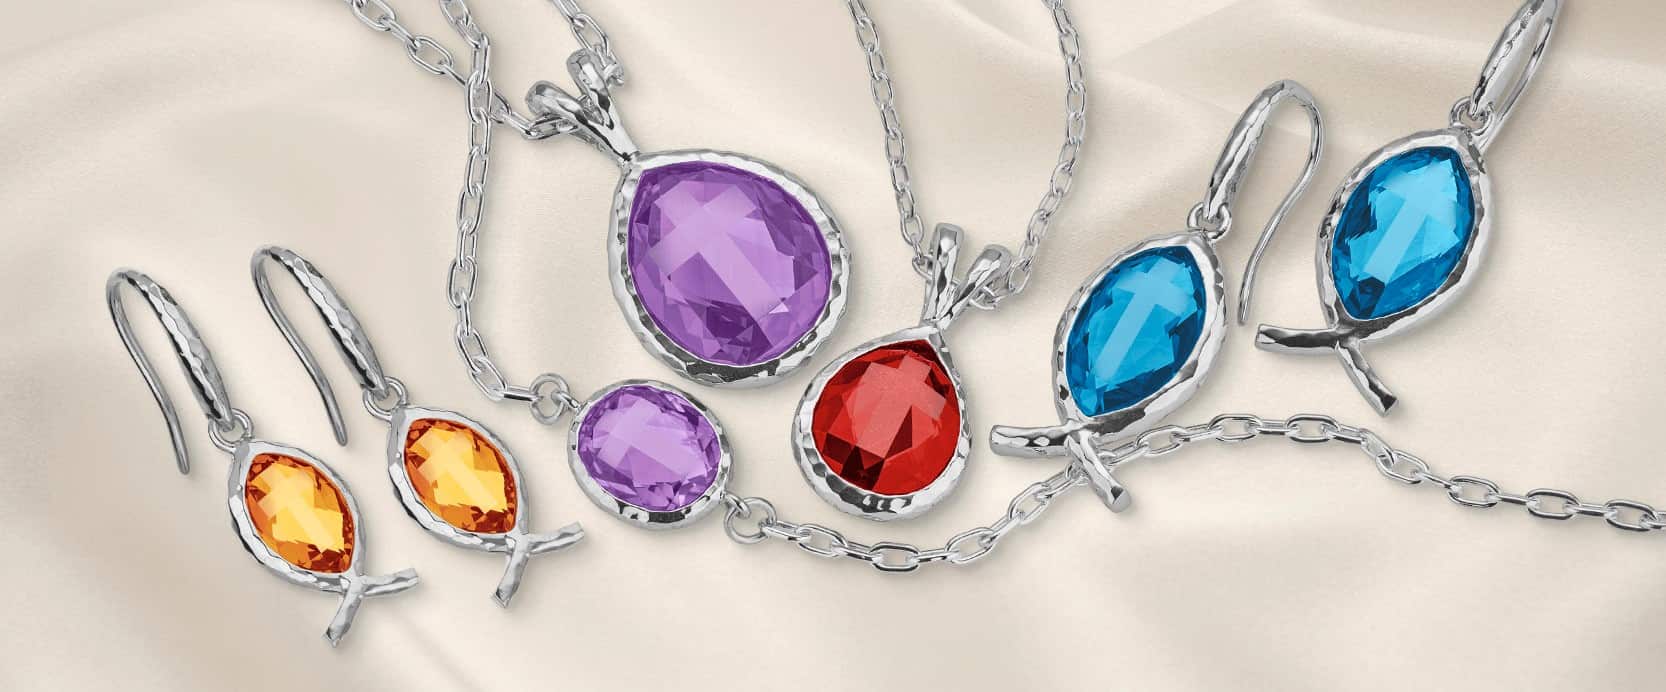 Jewelry with colored stones